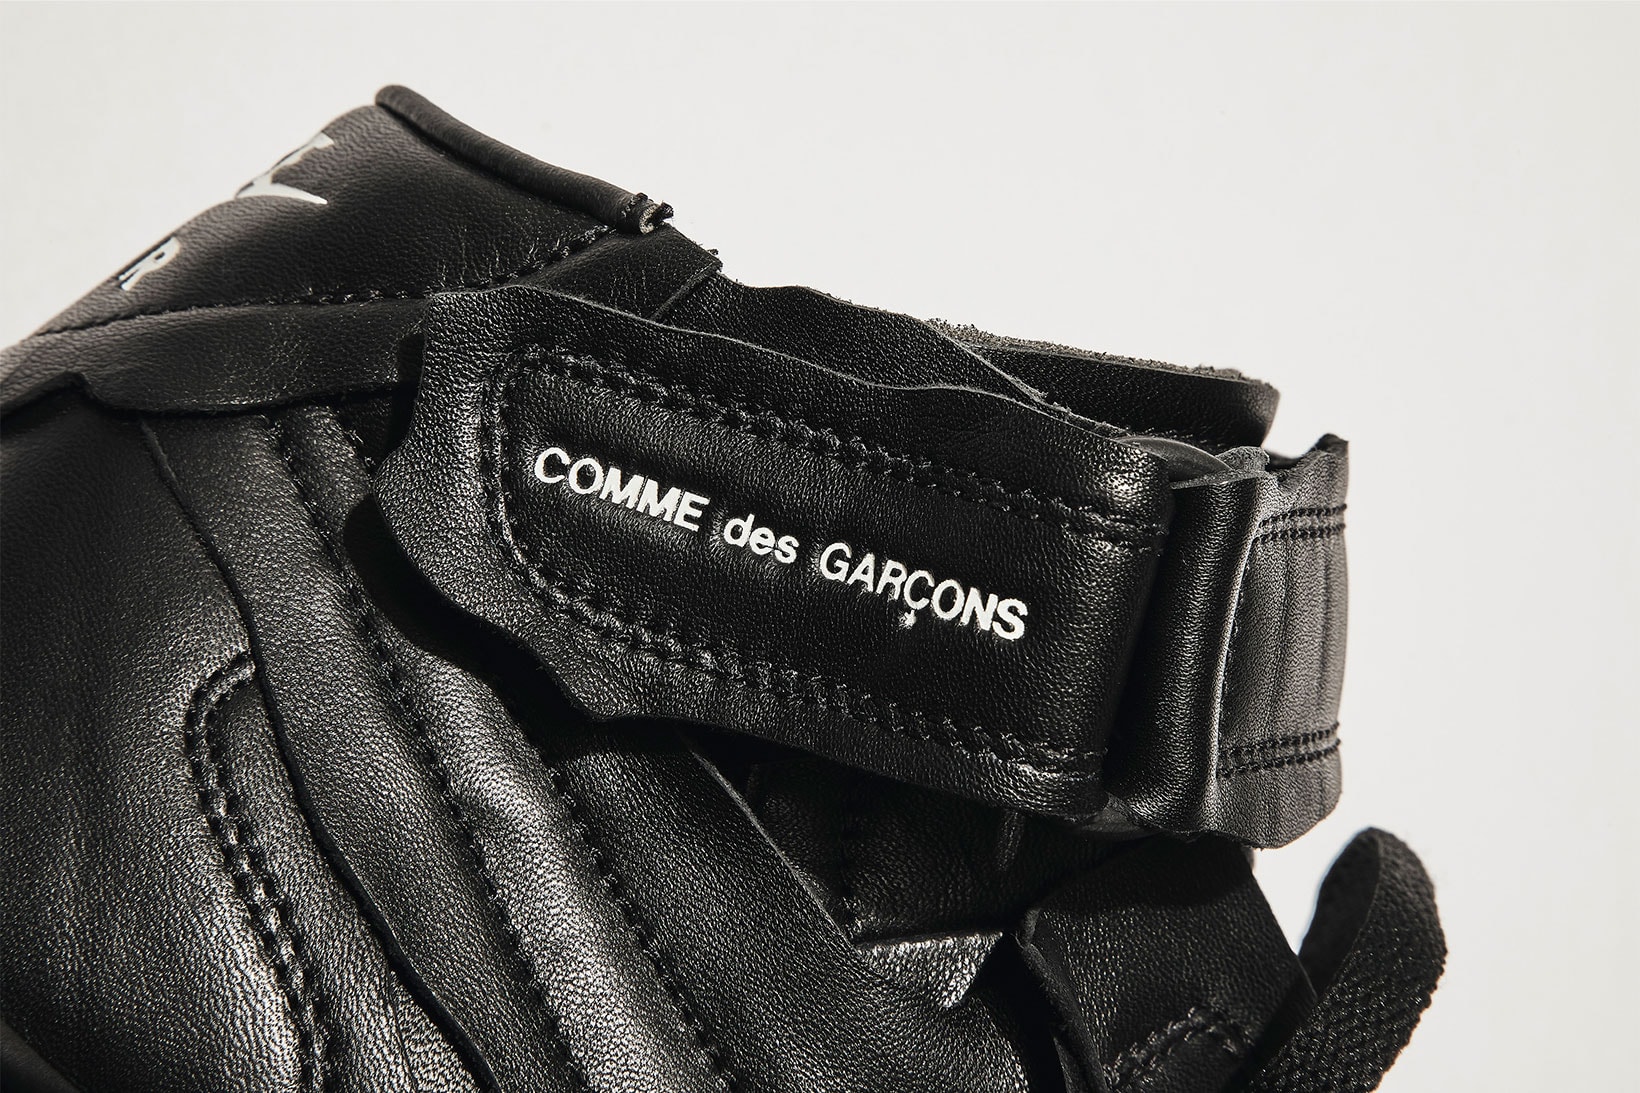 comme des garcons nike air force 1 mid cdg af1 white black sneakers price release